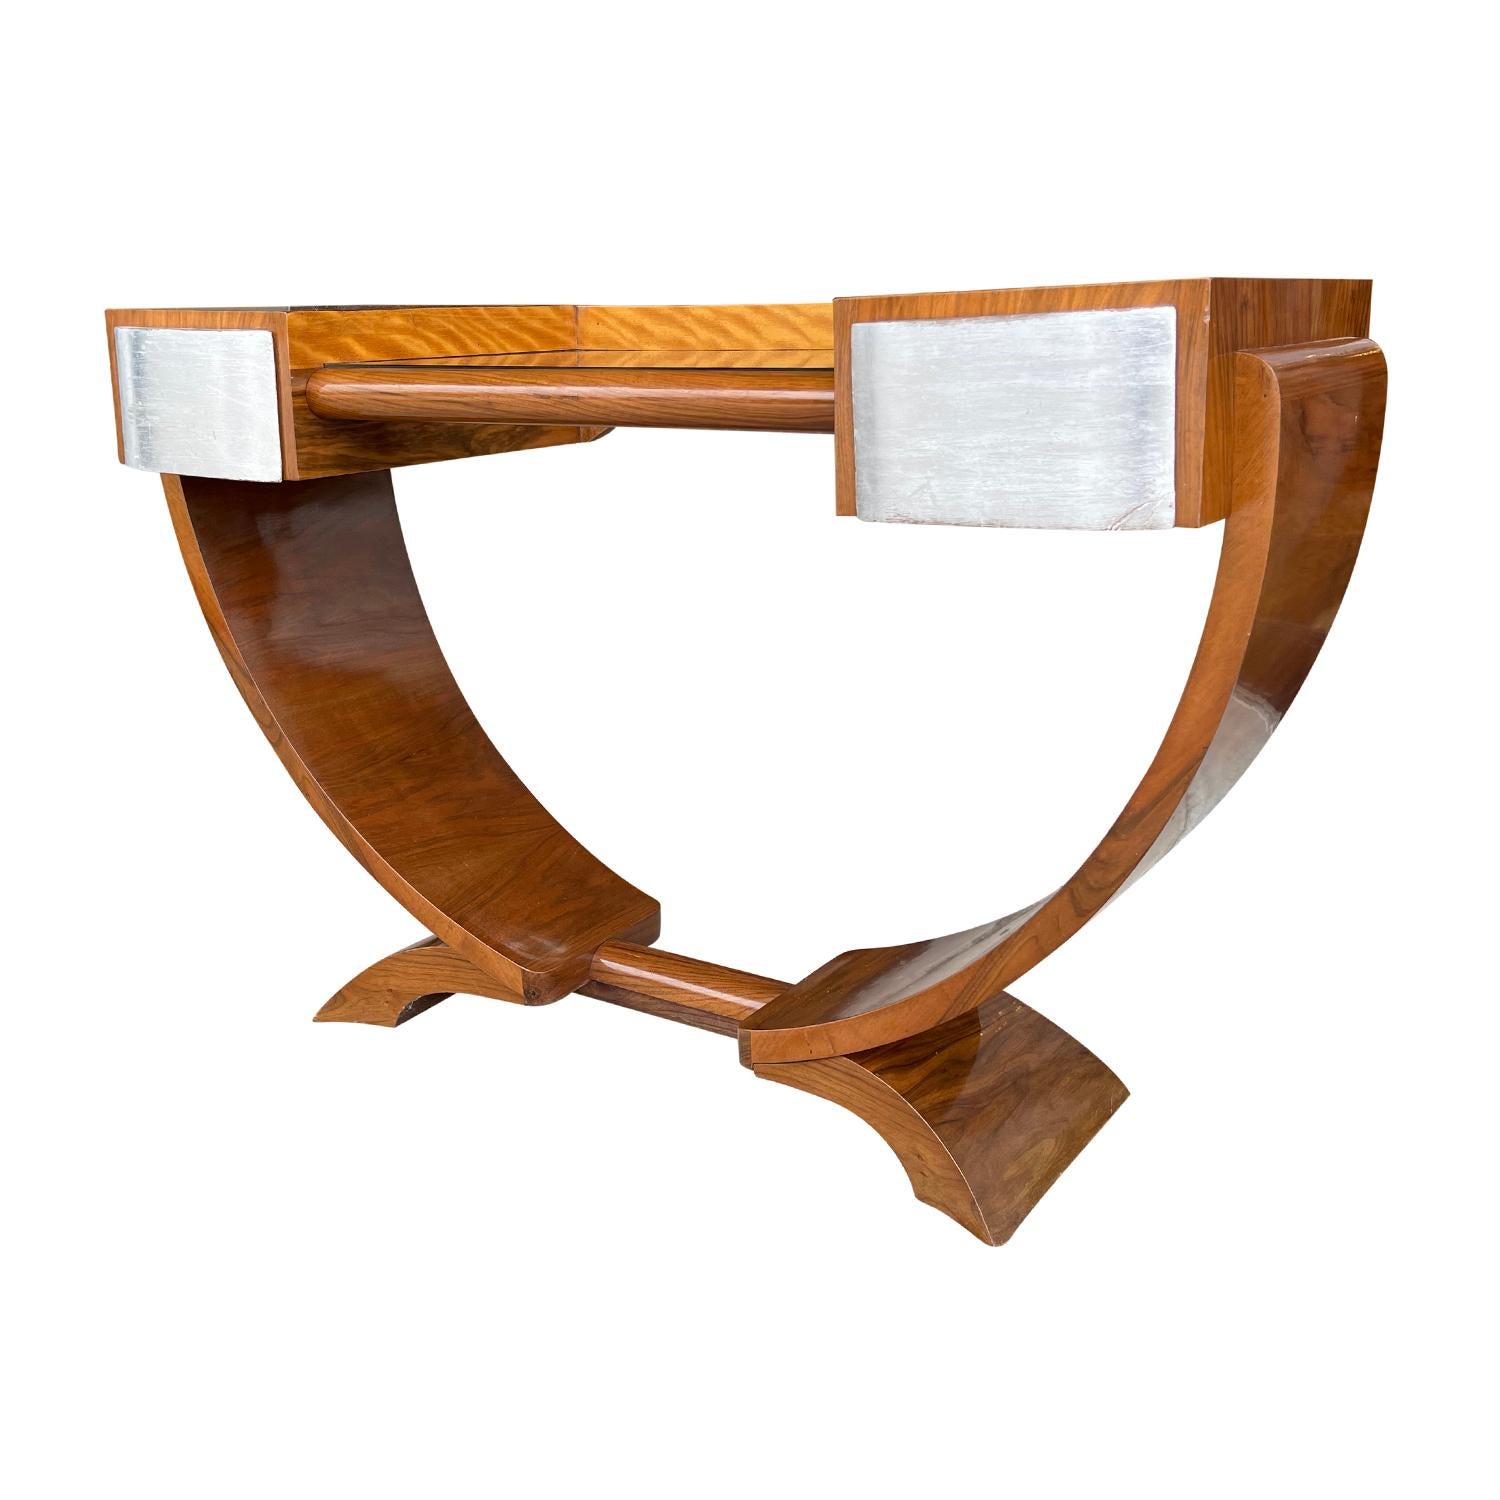 20th Century French Art Deco Walnut Coiffeuse Vanity by Émile-Jacques Ruhlmann In Good Condition For Sale In West Palm Beach, FL